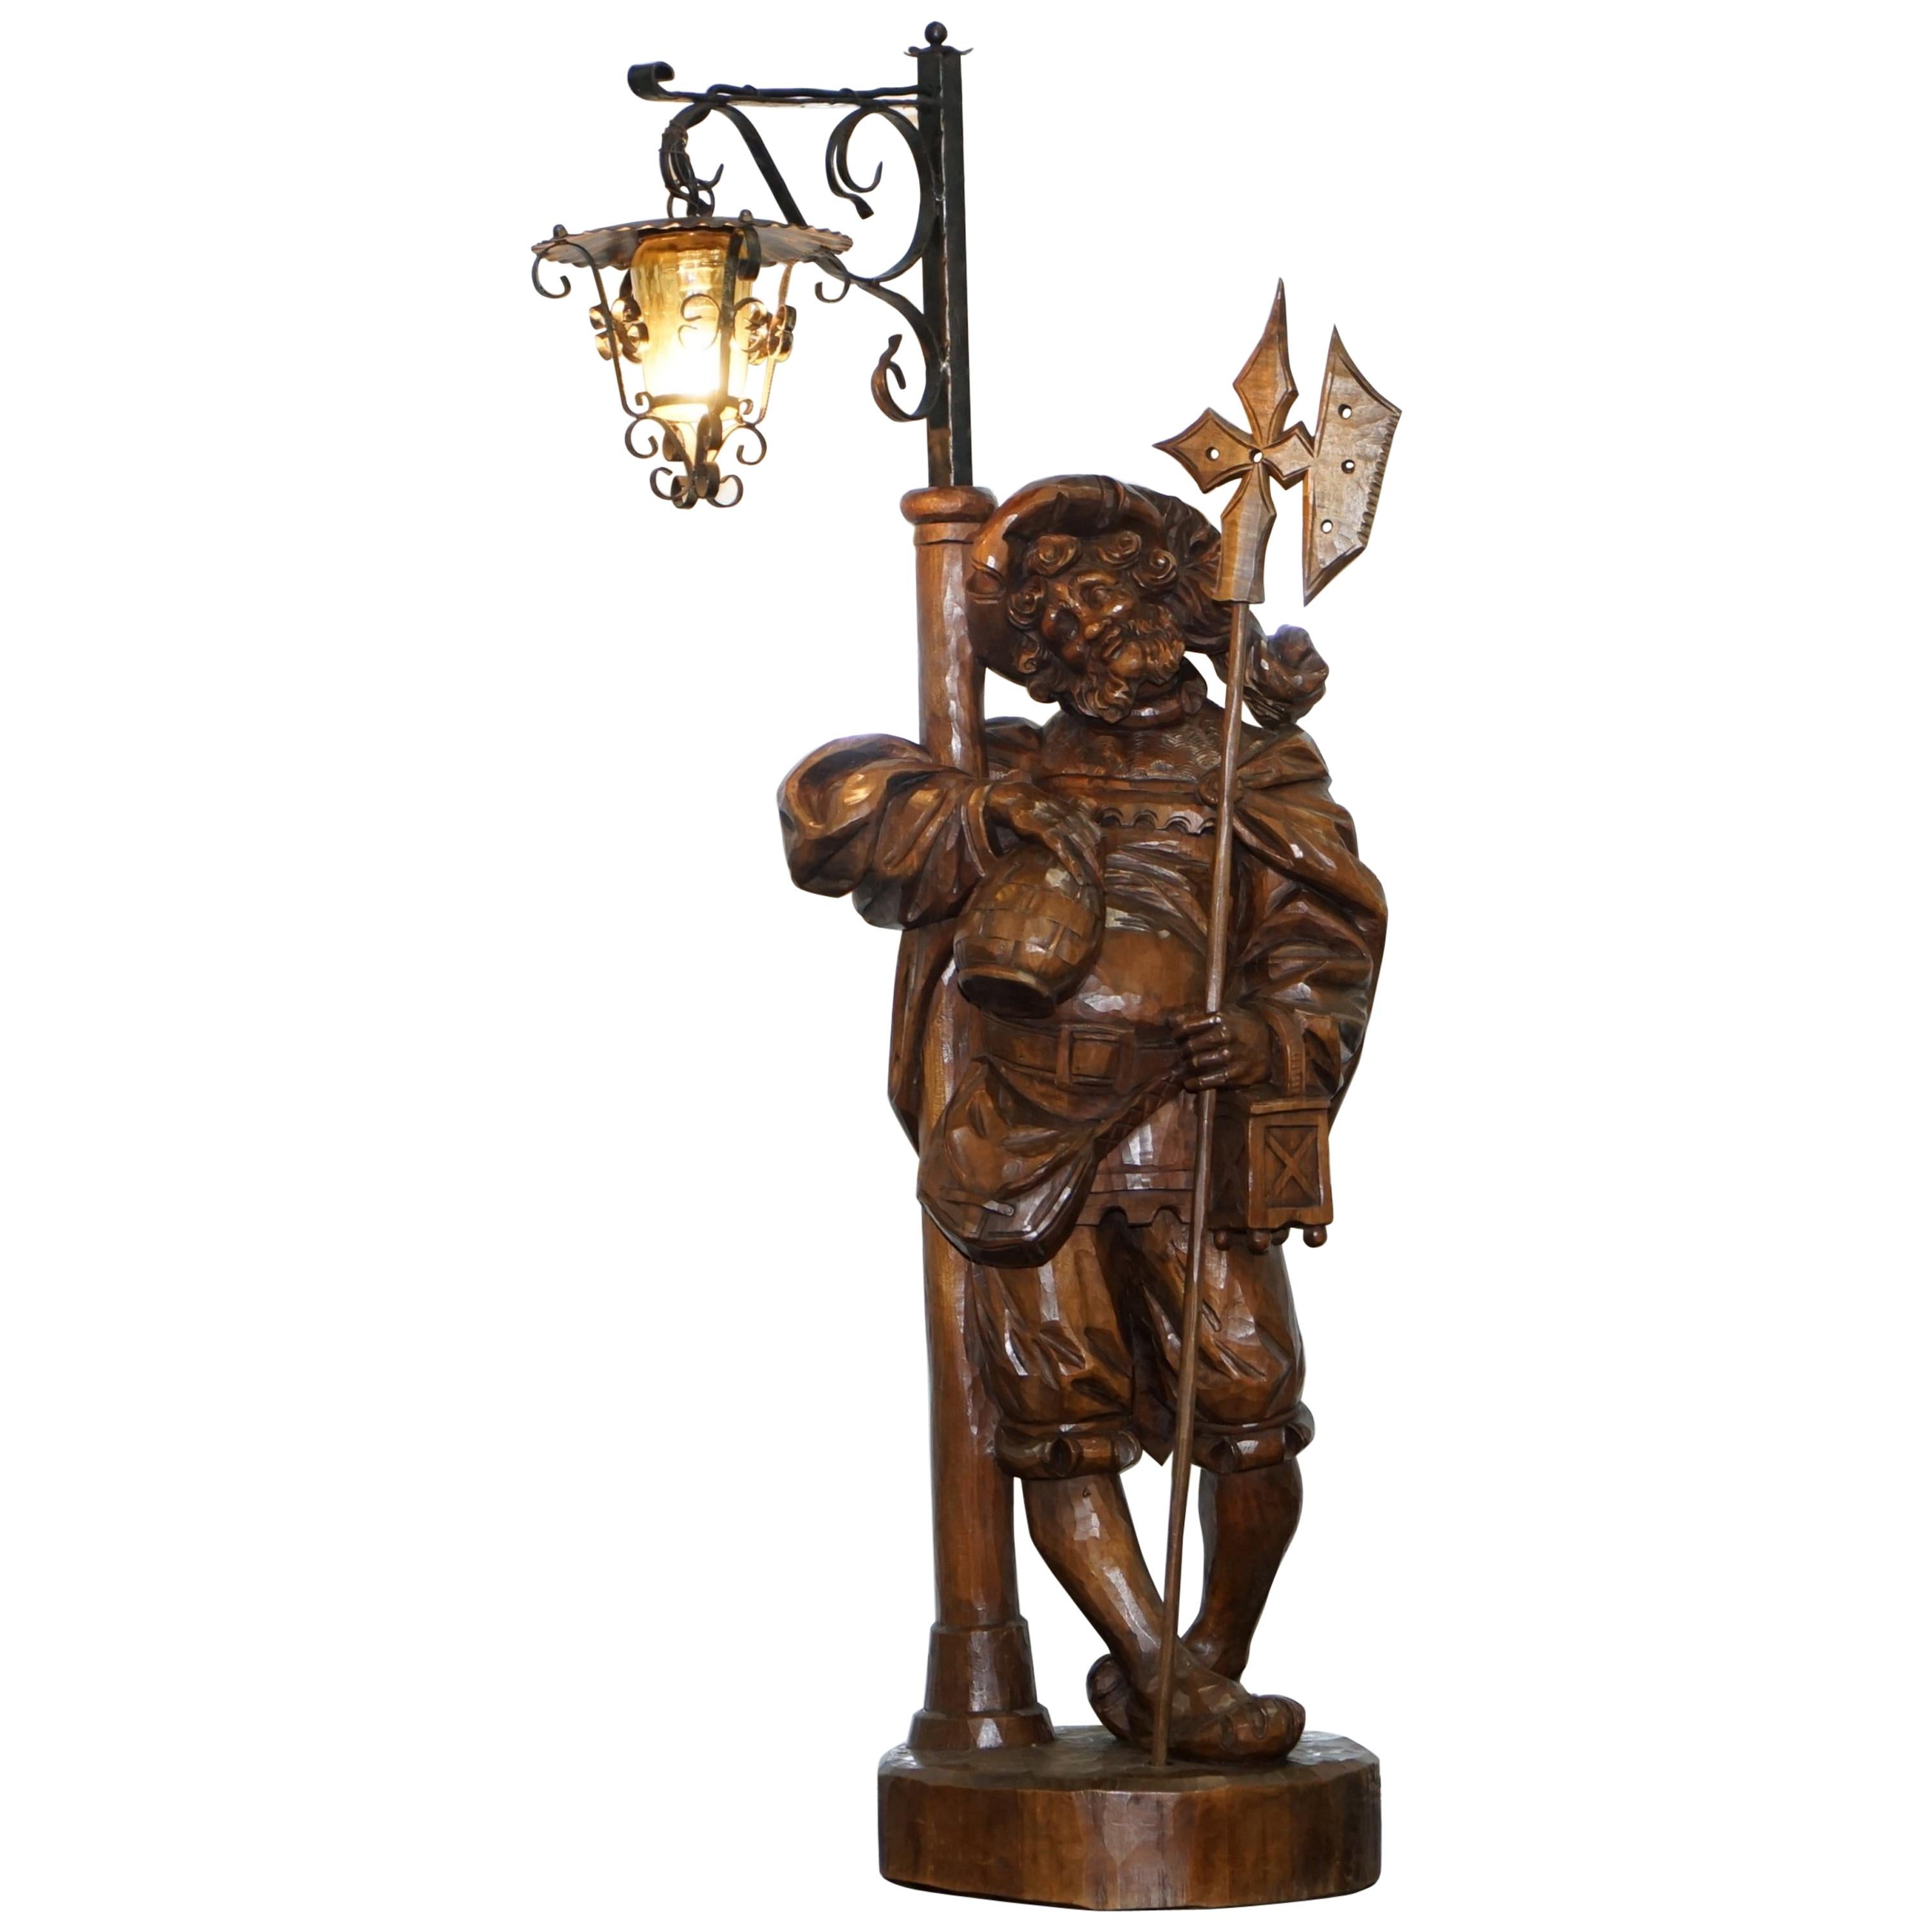 Rare circa 1920 Original Black Forest Hand Carved Wood Watchman Lamp